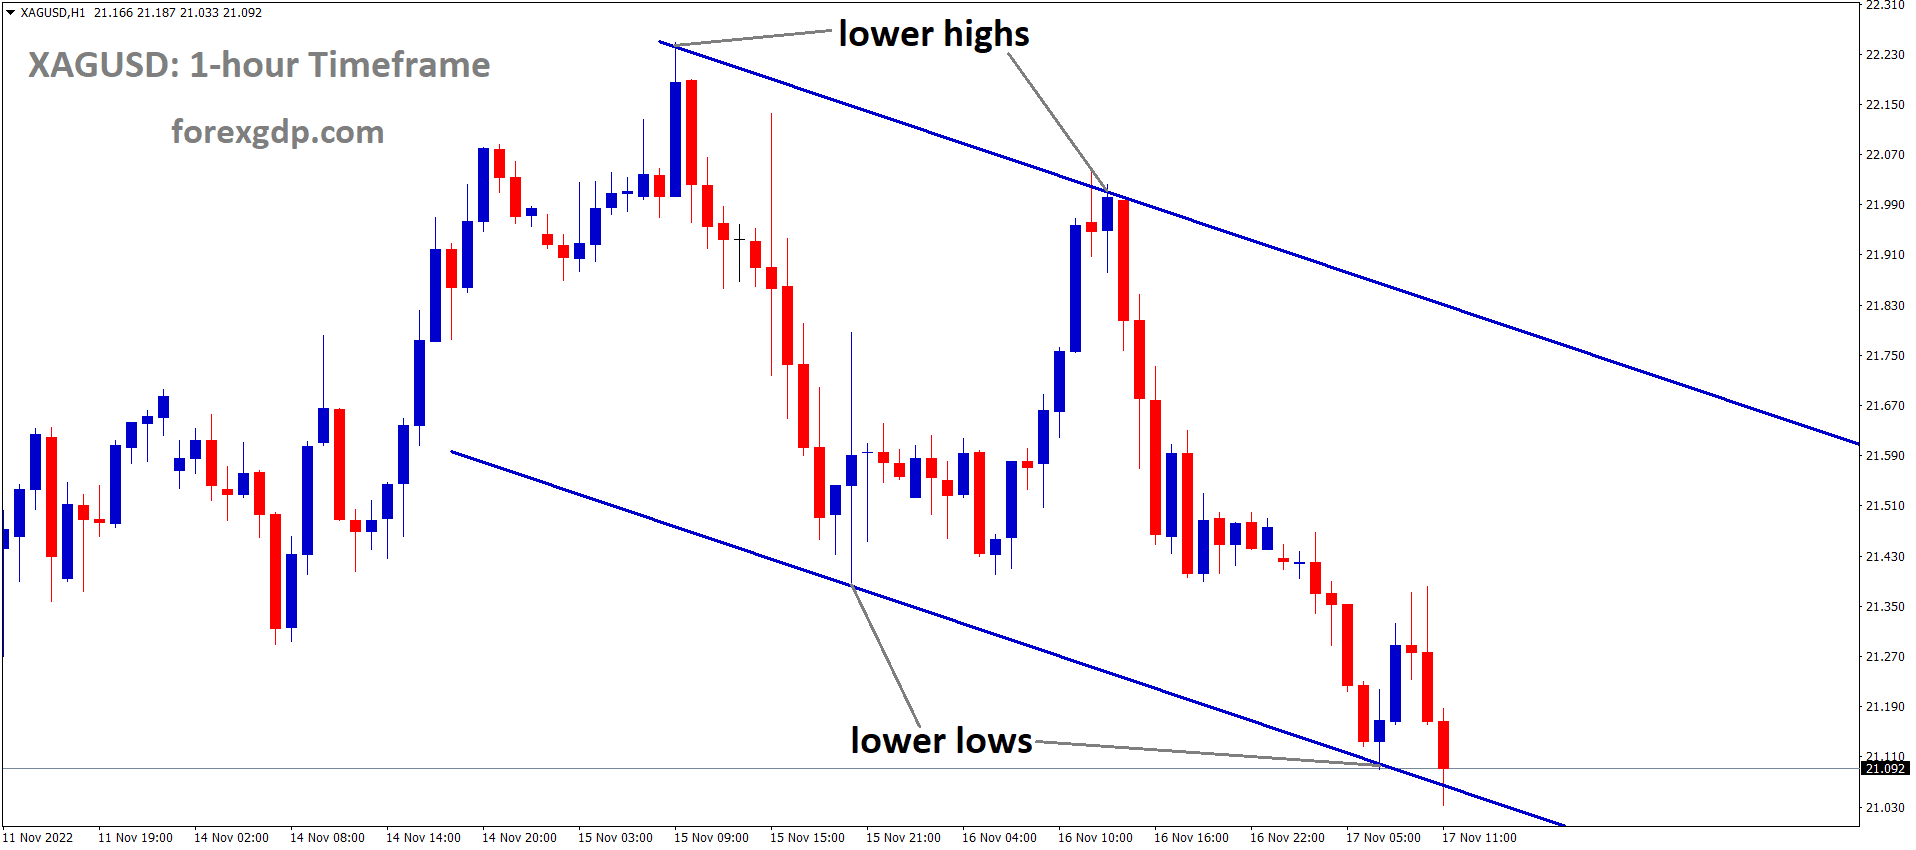 XAGUSD Silver price is moving in the Descending channel and the market has reached the lower low area of the channel